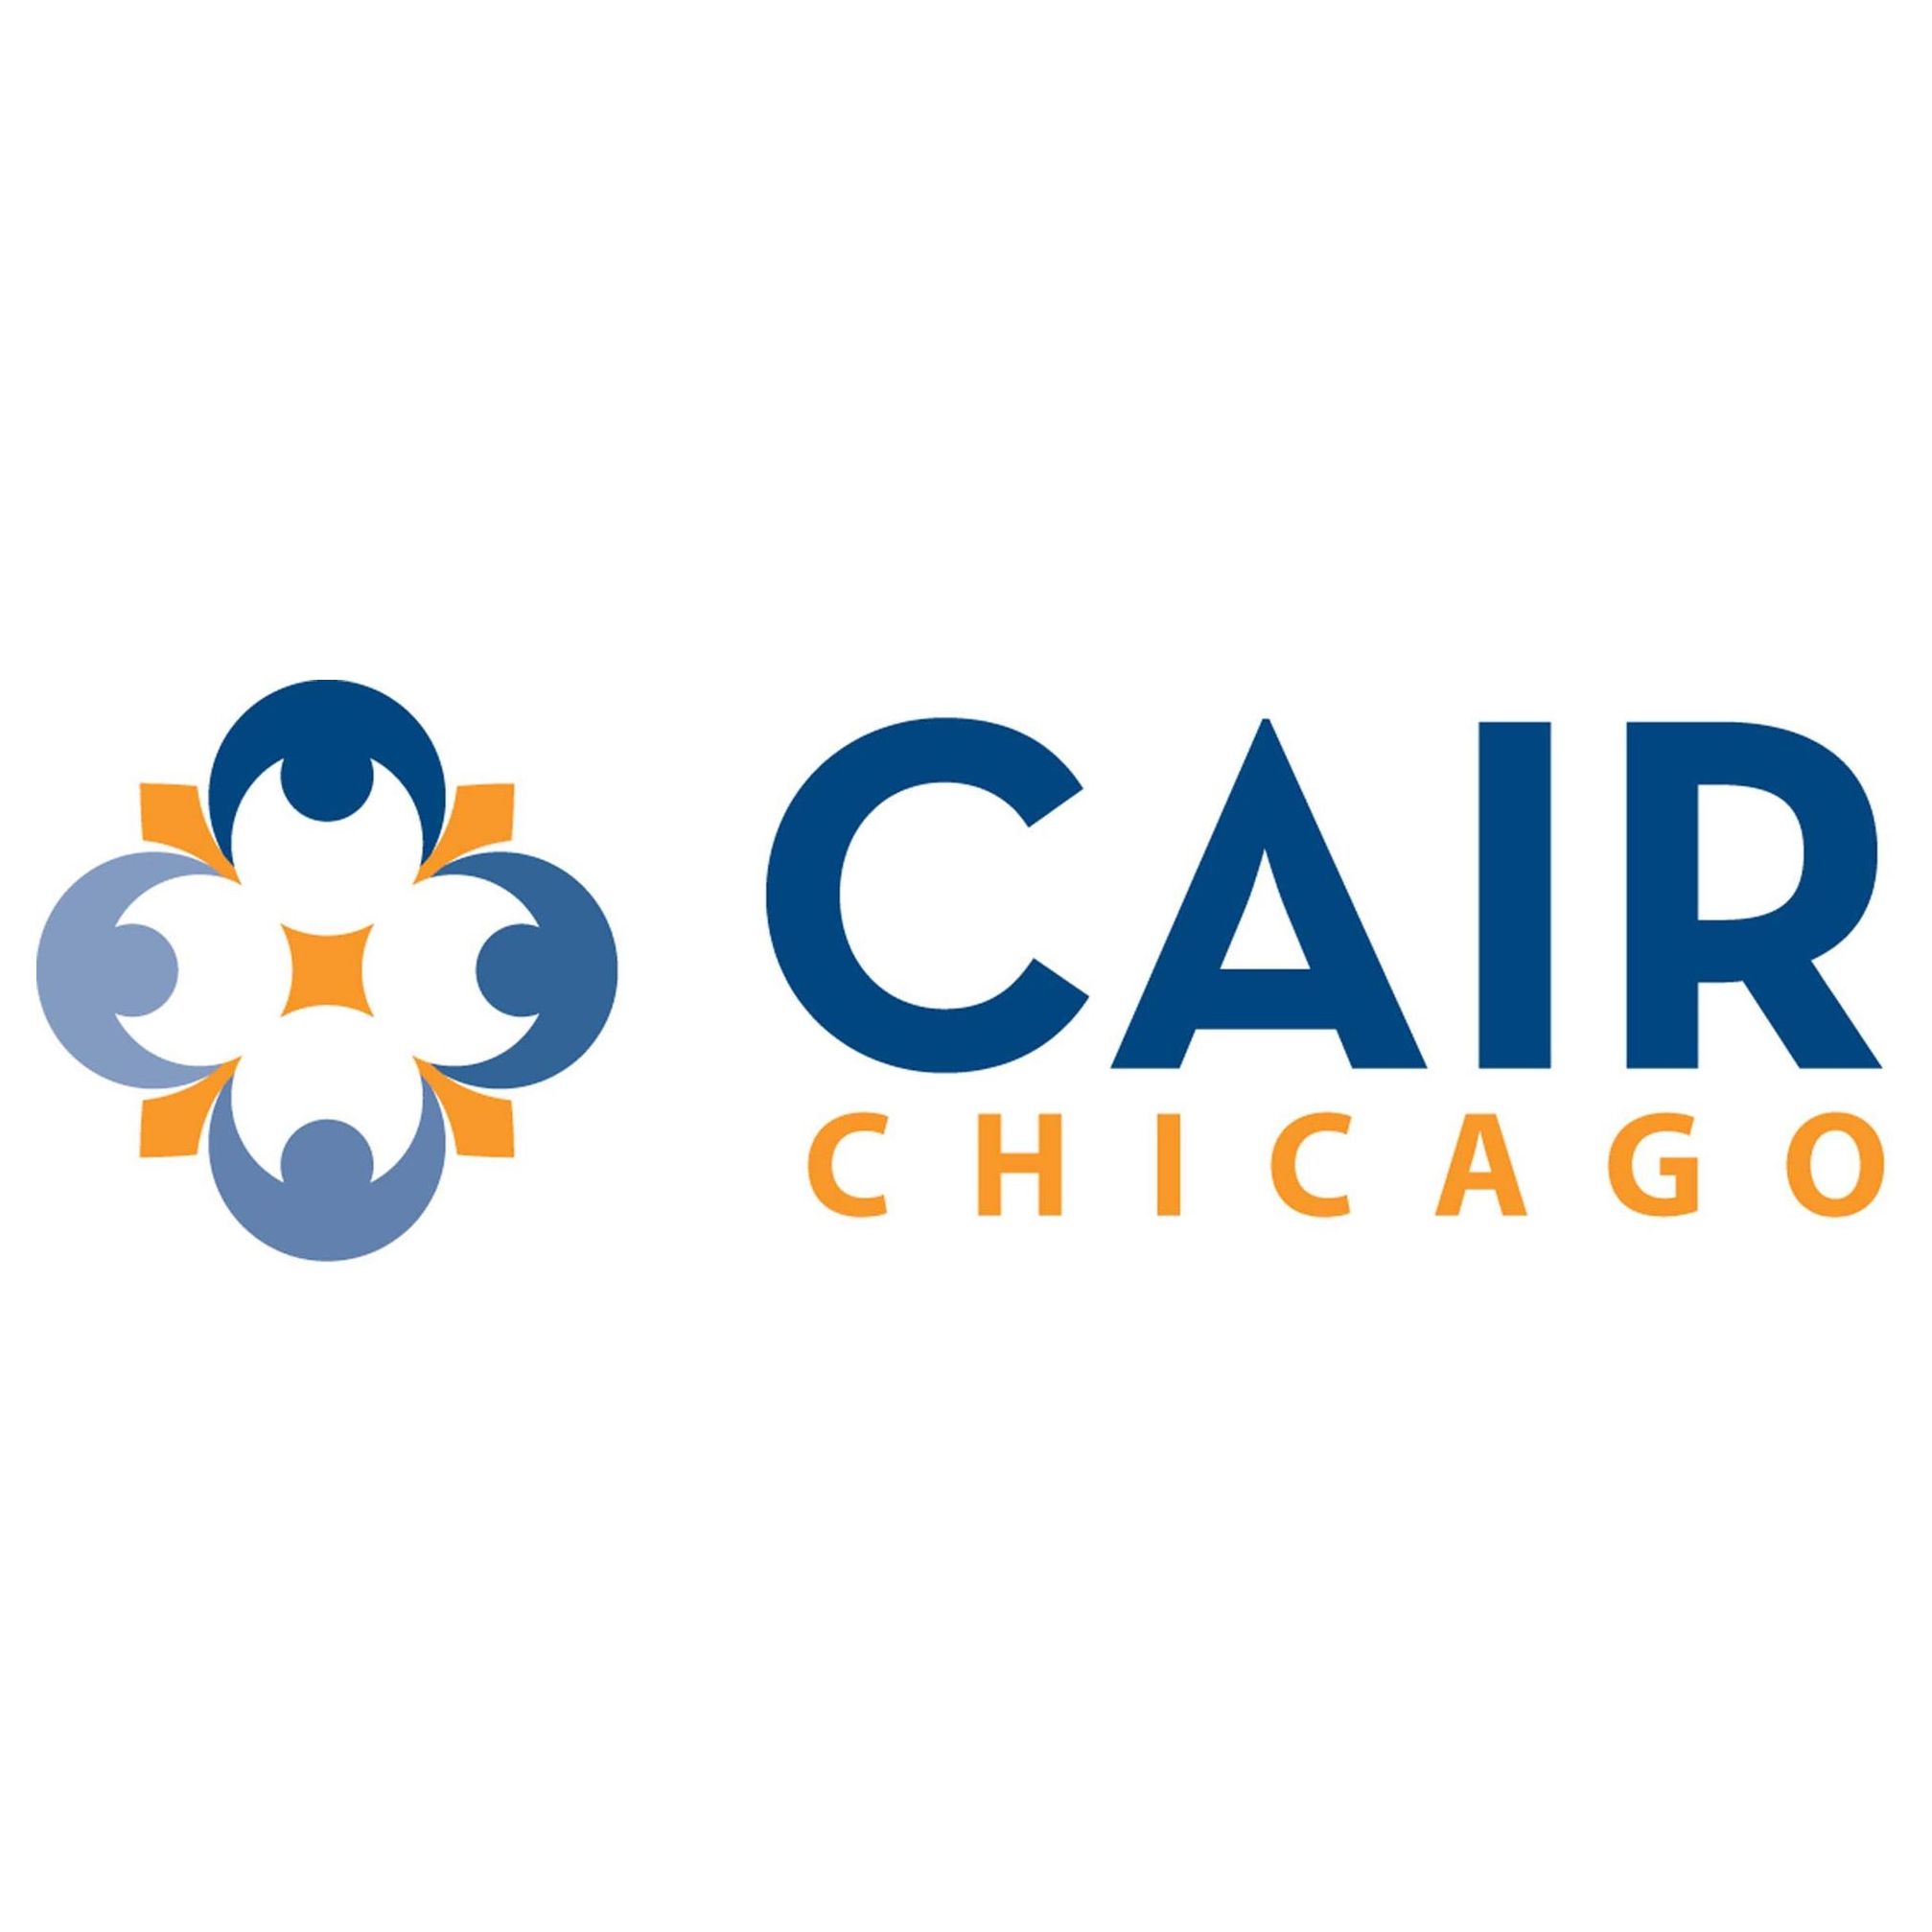 Muslim Associations Near Me - Council on American-Islamic Relations Chicago